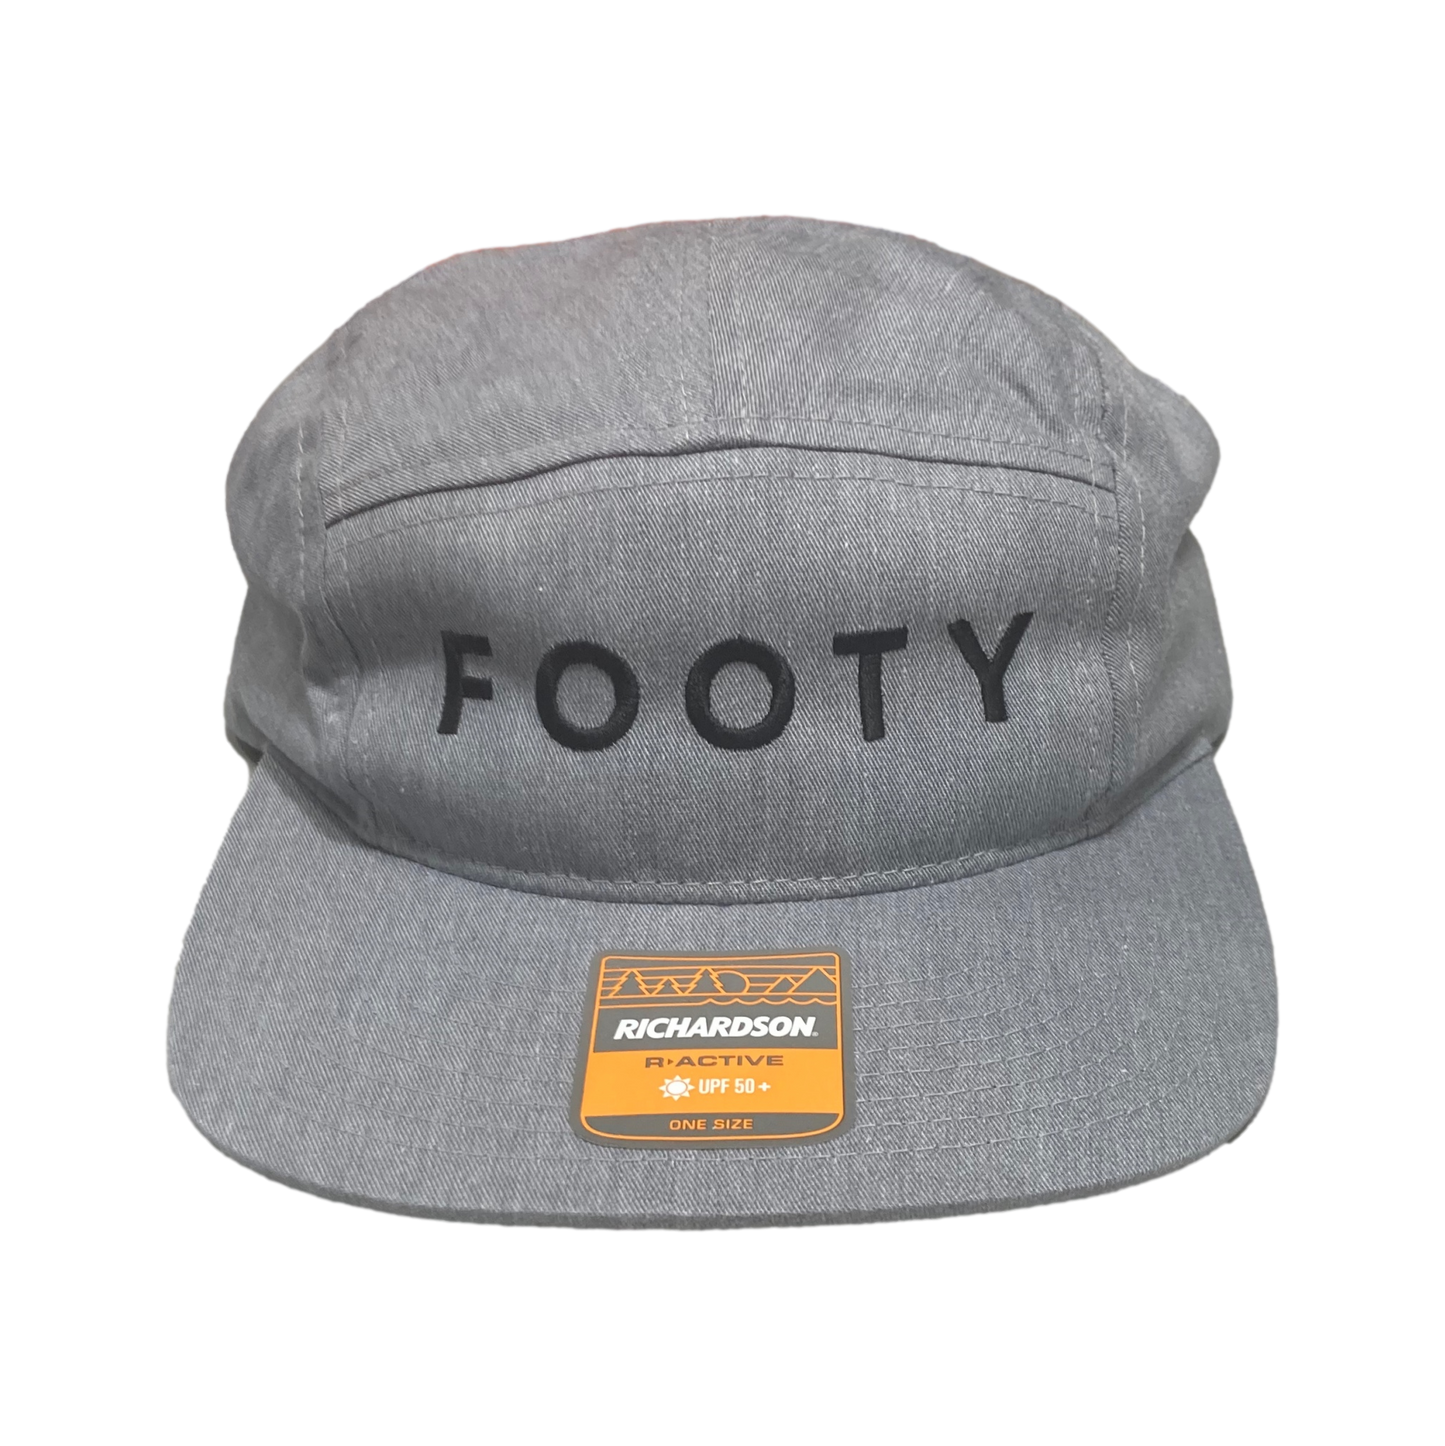 FOOTY embroidered grey 5 panel hat